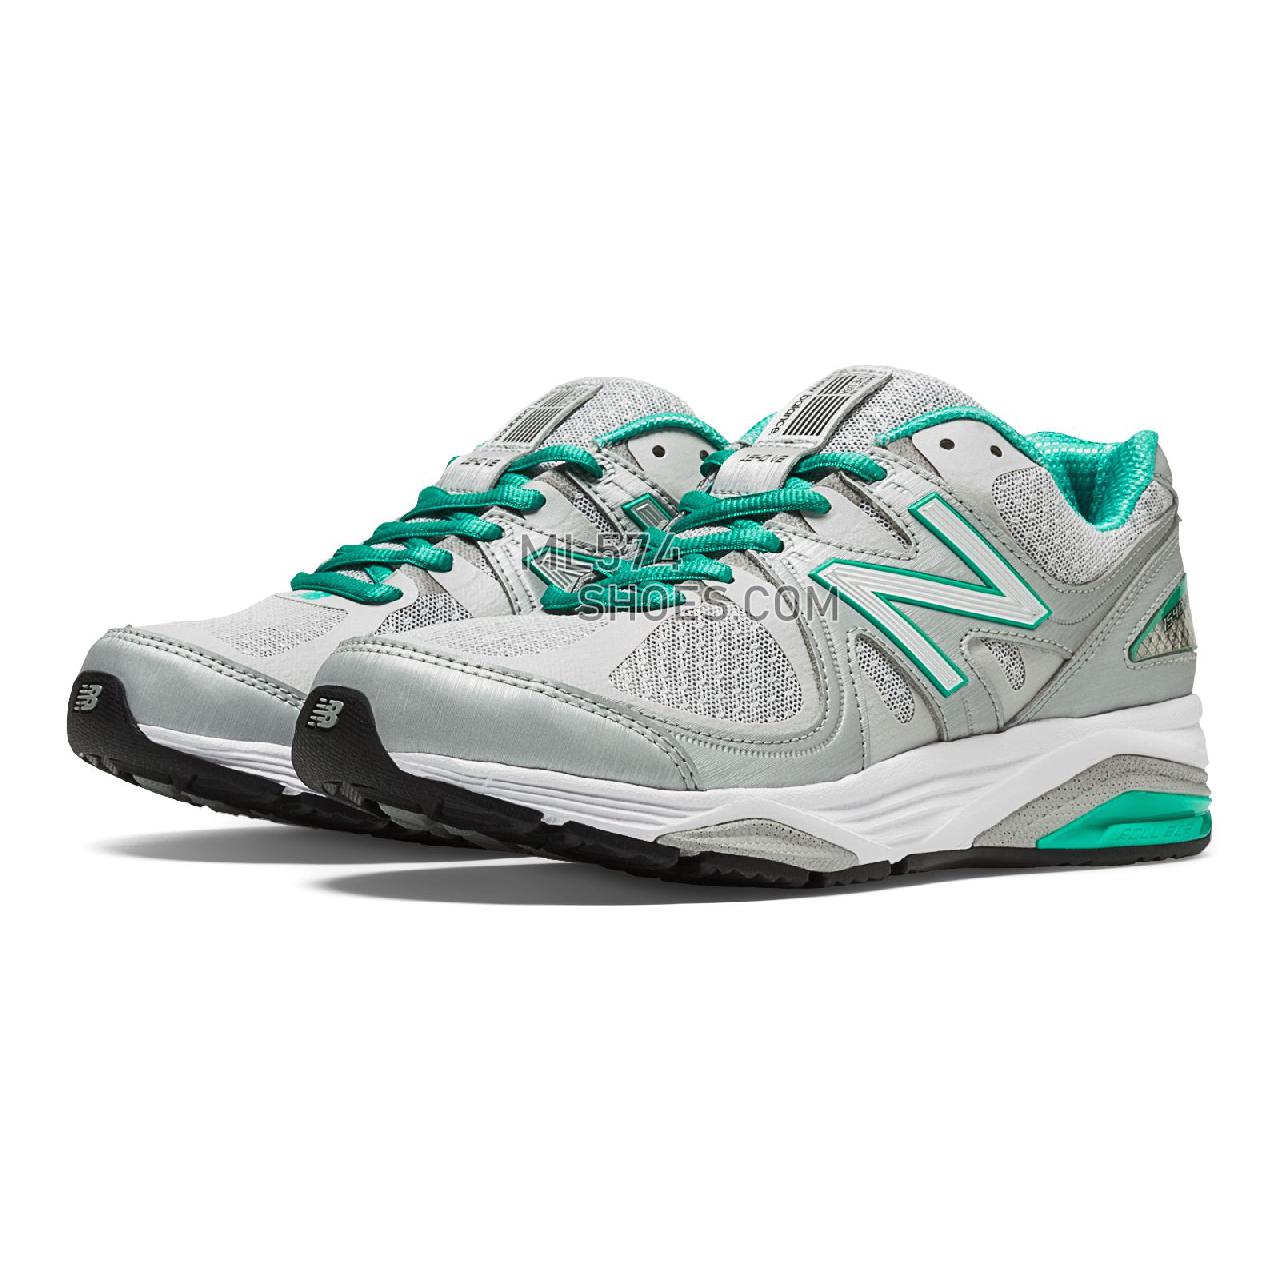 New Balance 1540v2 - Women's 1540 - Running Silver with Mint Green - W1540SG2